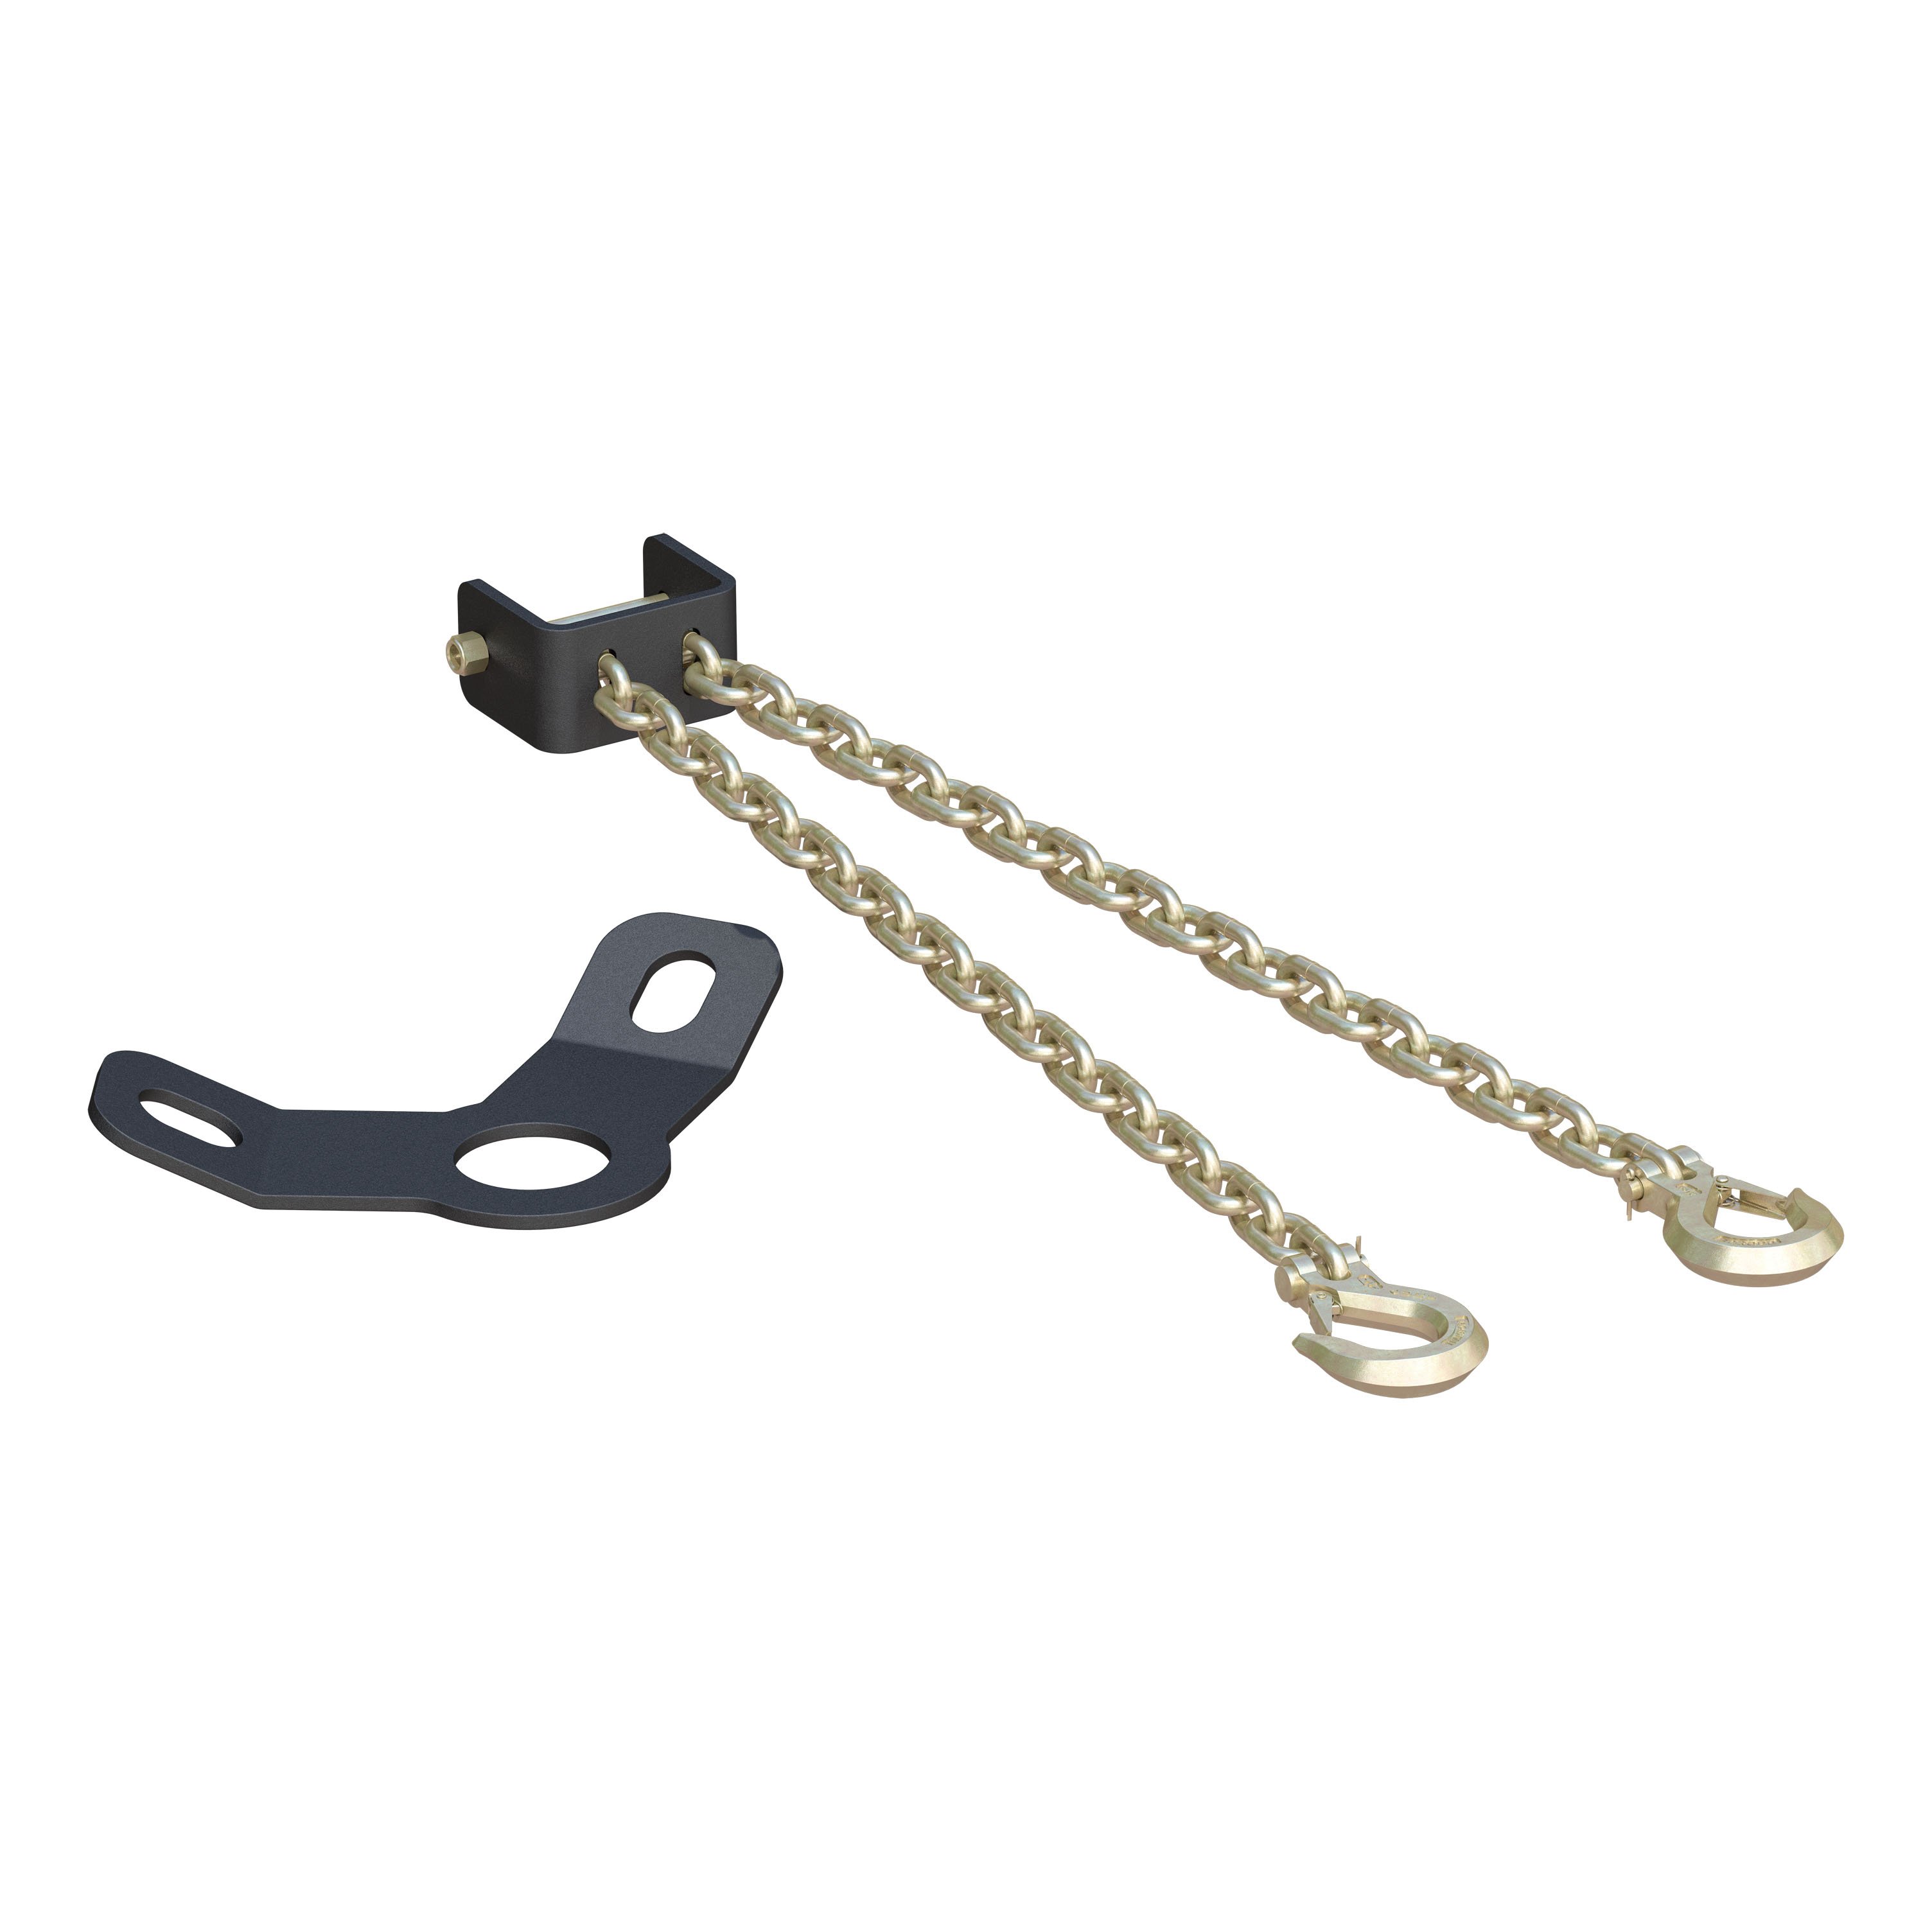 Curt CrossWing 5th Wheel Safety Chain Assembly With Gooseneck Anchor Plate